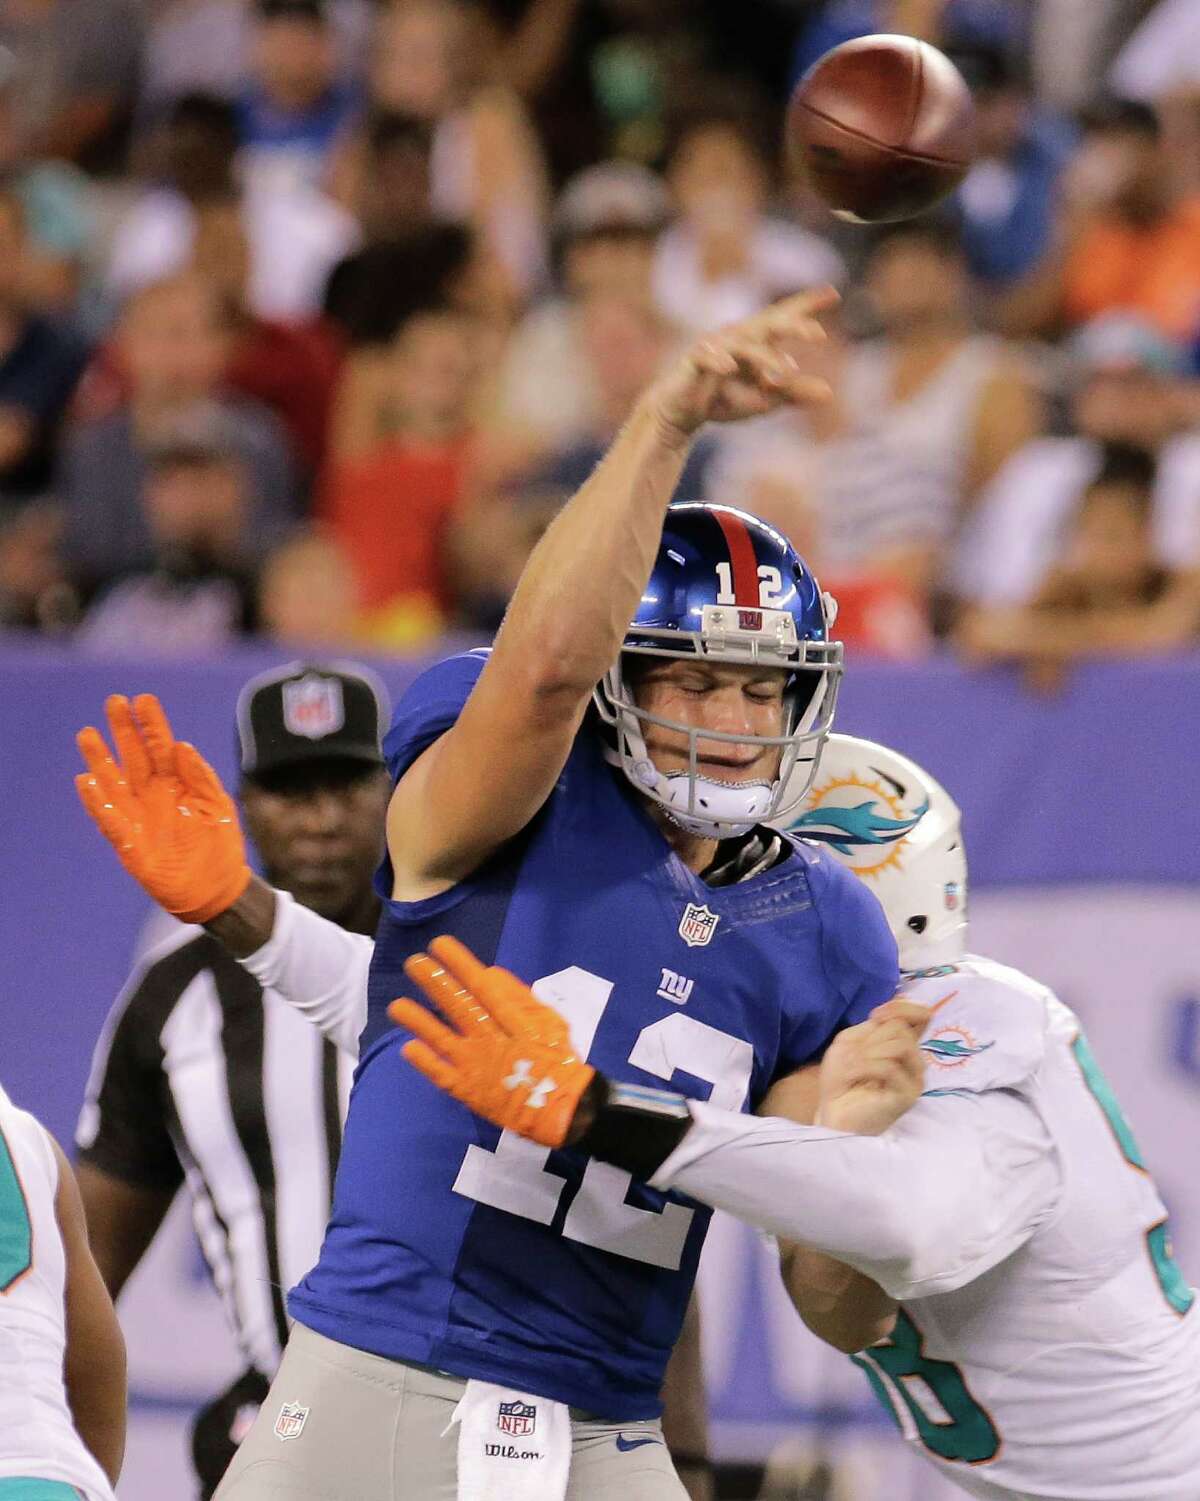 New York Giants quarterback Ryan Nassib (12) is hit by Miami Dolphins defensive end Chris McCain (58) during the first quarter of an NFL football game, Friday, Aug. 12, 2016, in East Rutherford, N.J. (AP Photo/Ray Stubblebine) ORG XMIT: ERU106